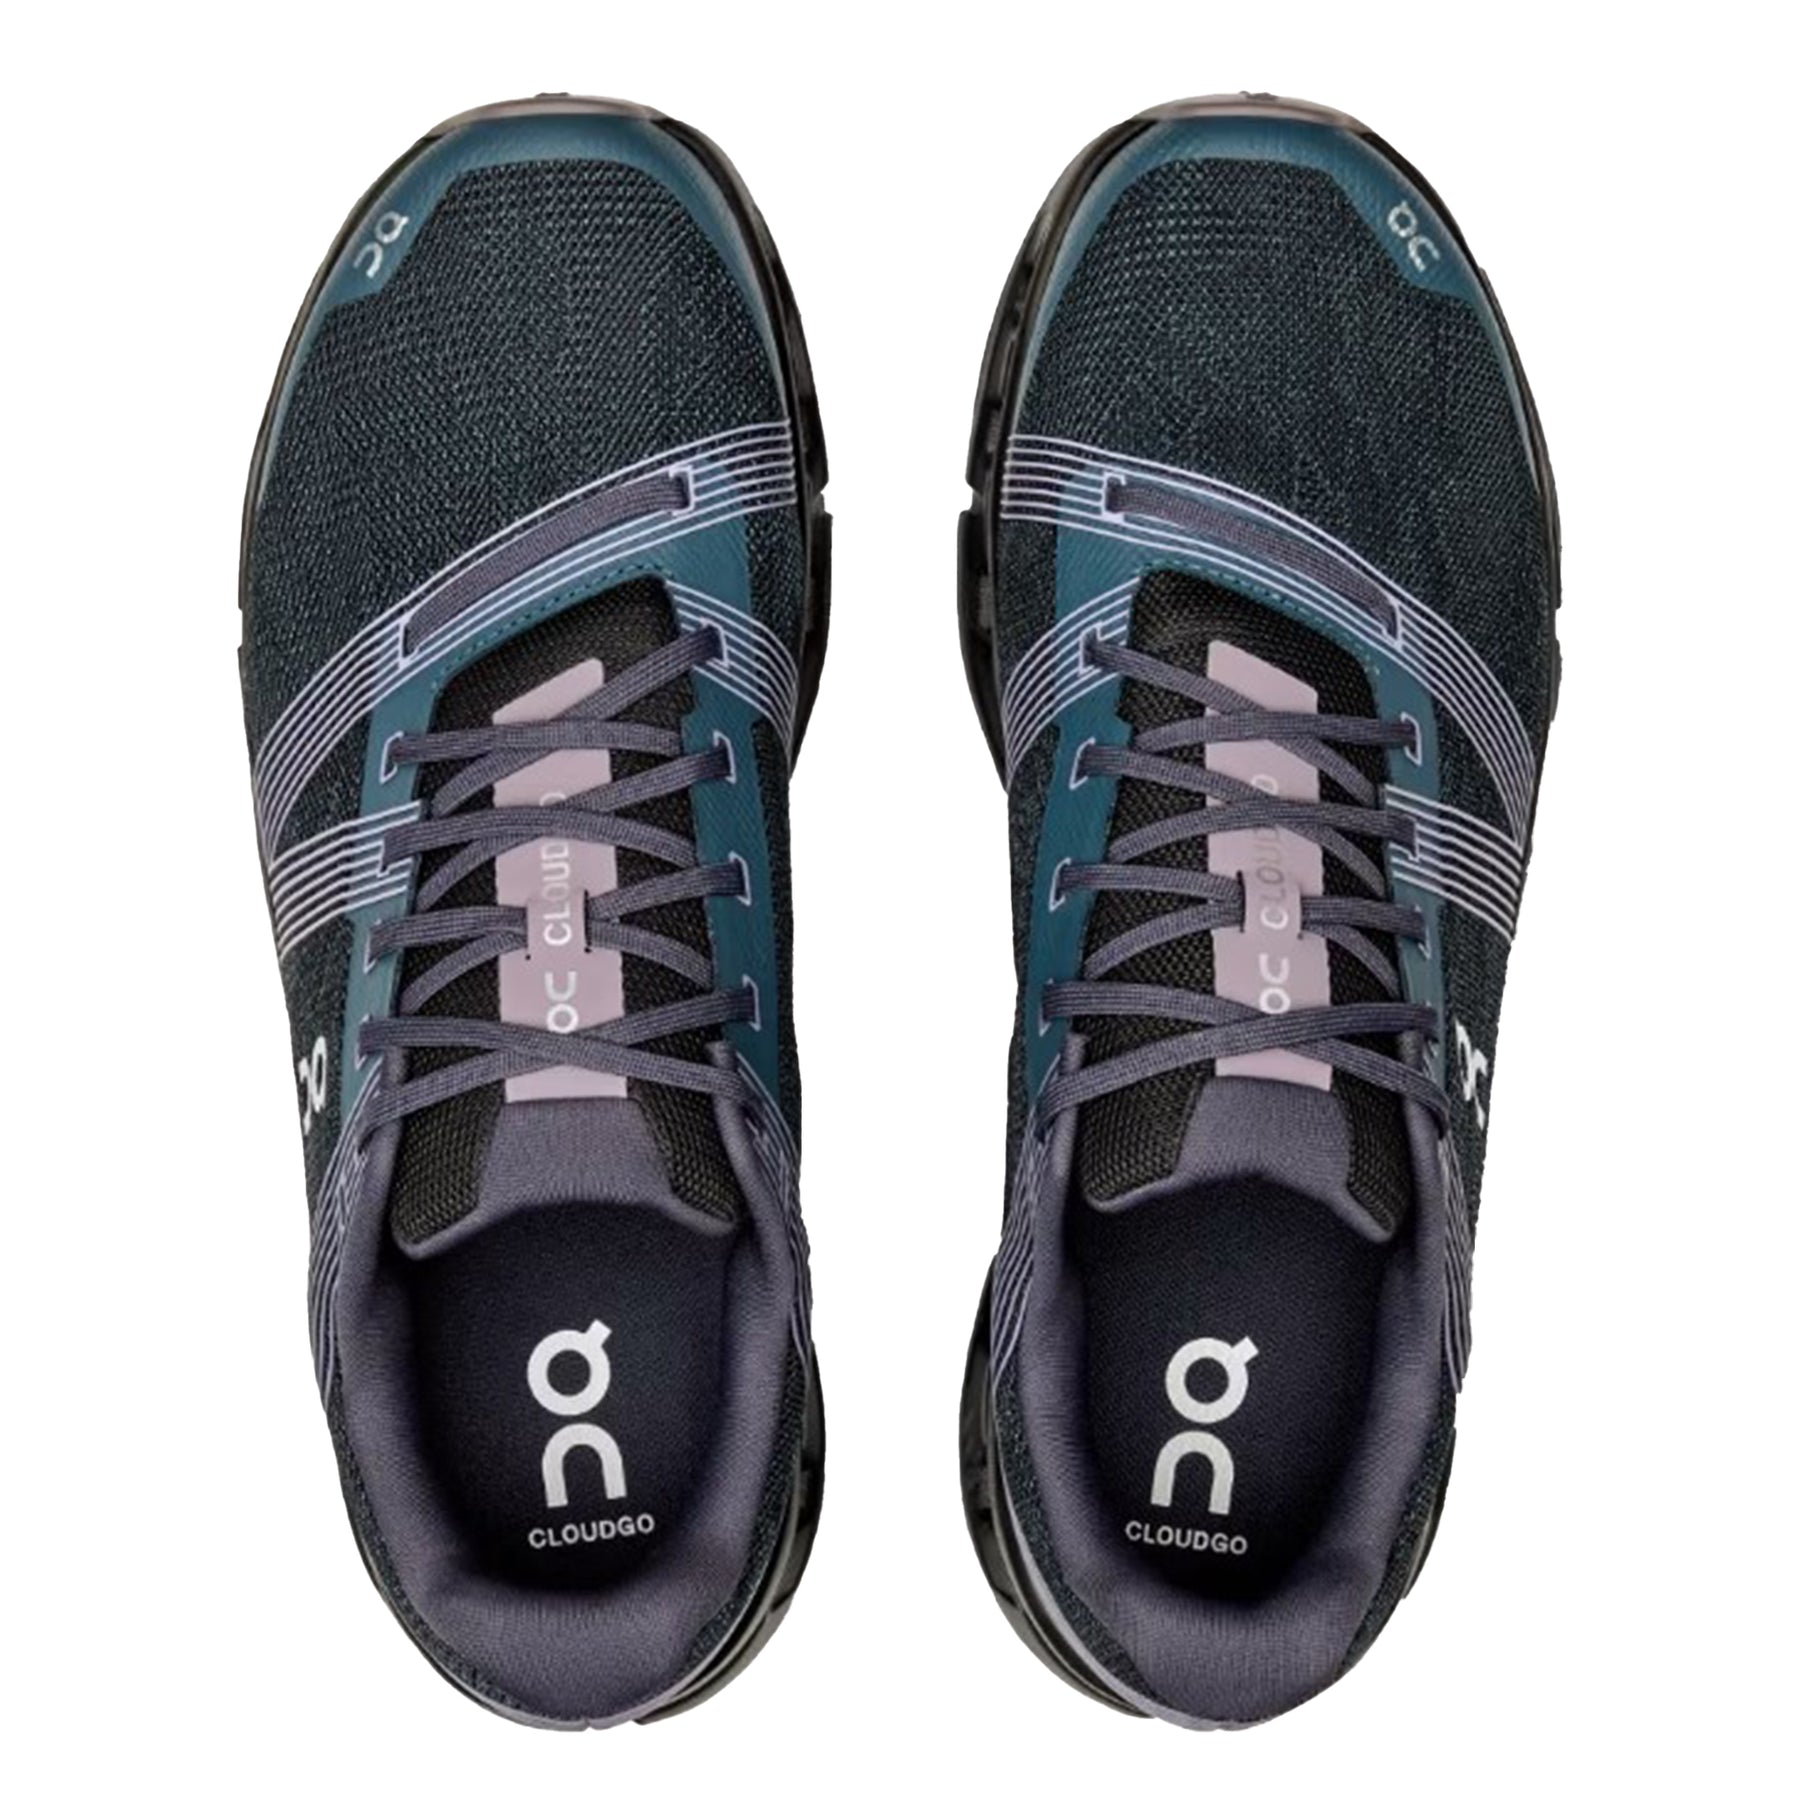 On Cloudgo Mens Running Shoes: Storm/Magnet